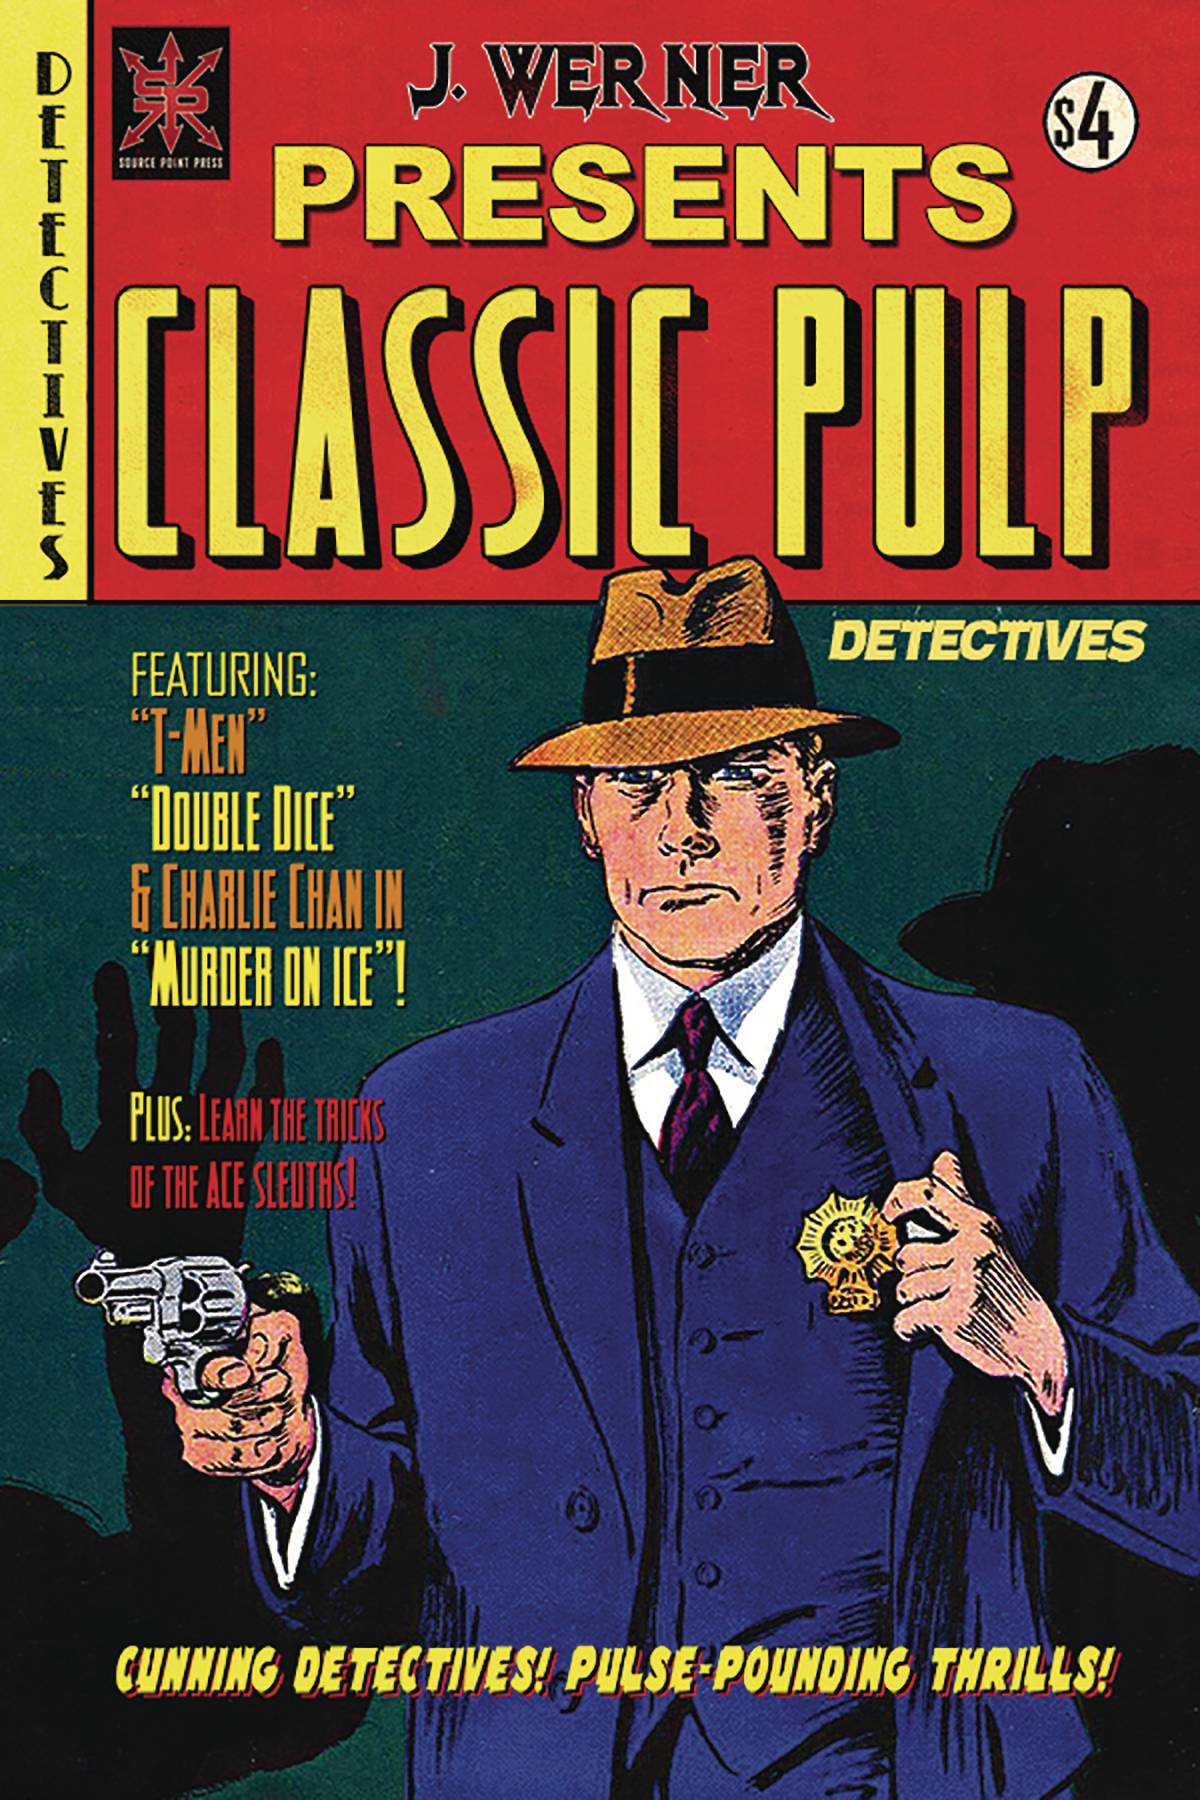 Classic Pulp Detectives (One Shot)